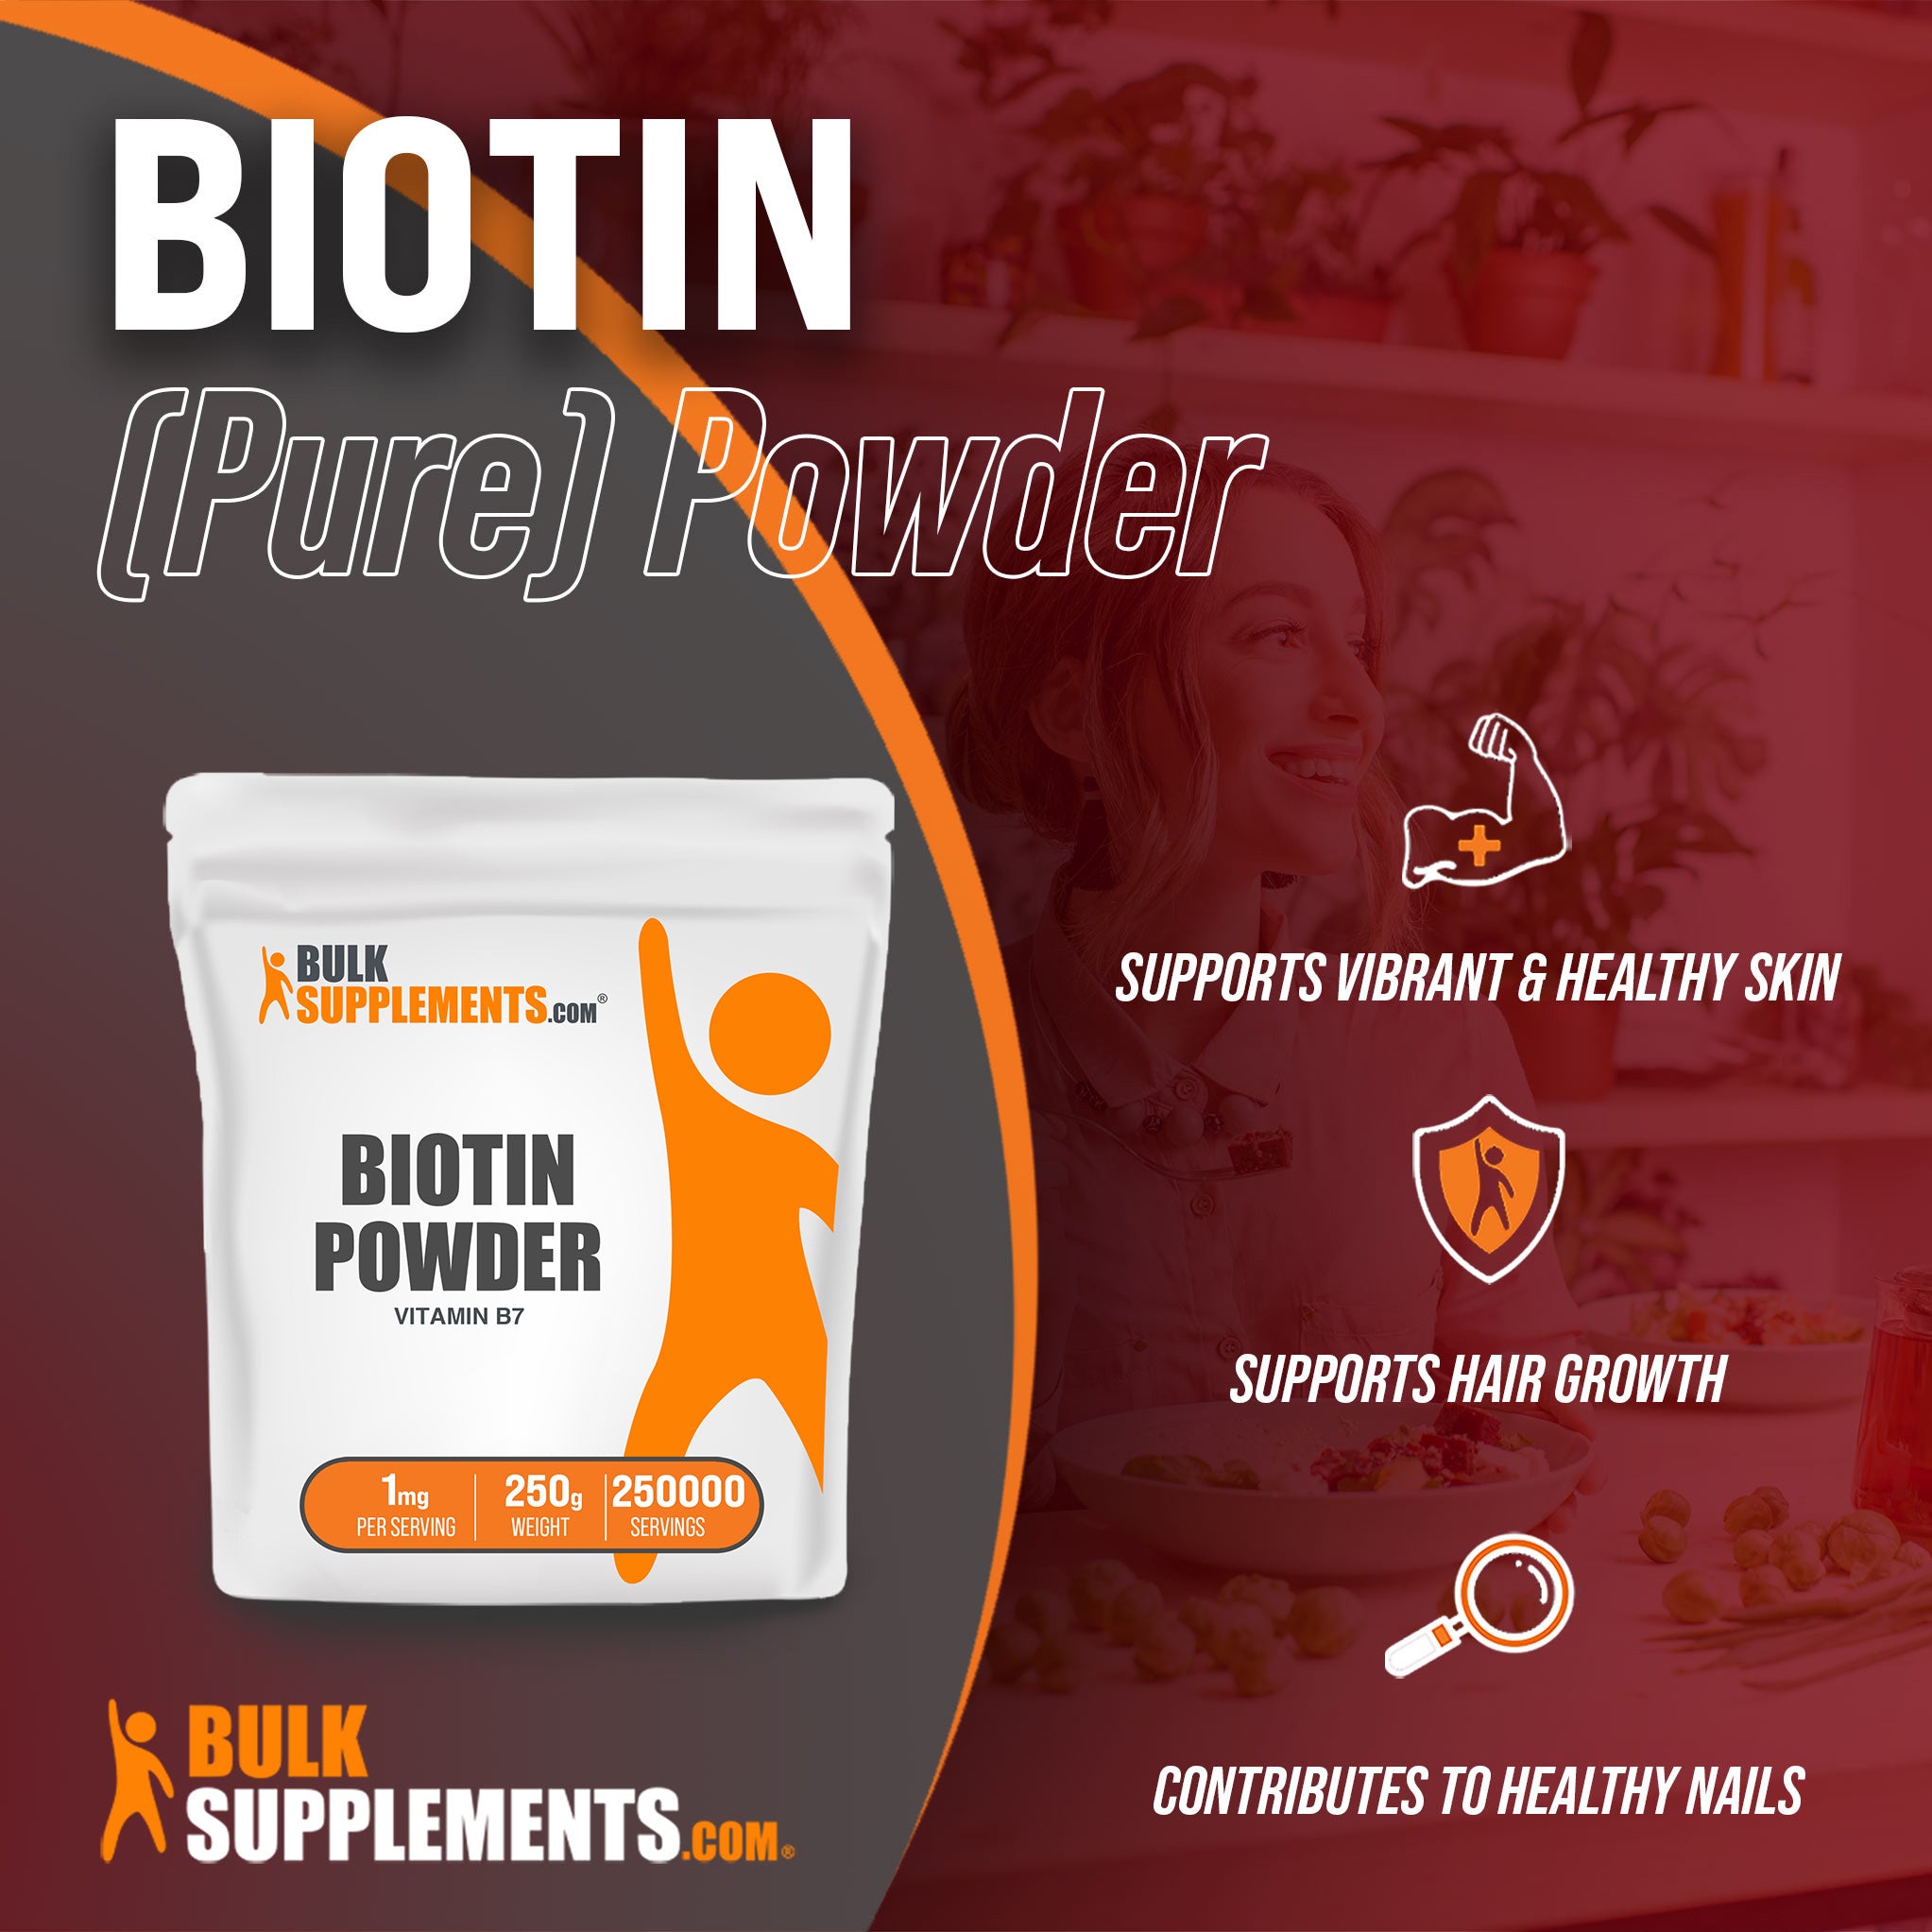 Benefits of Pure Biotin Powder: supports vibrant and healthy skin, supports hair growth, contributes to healthy nails